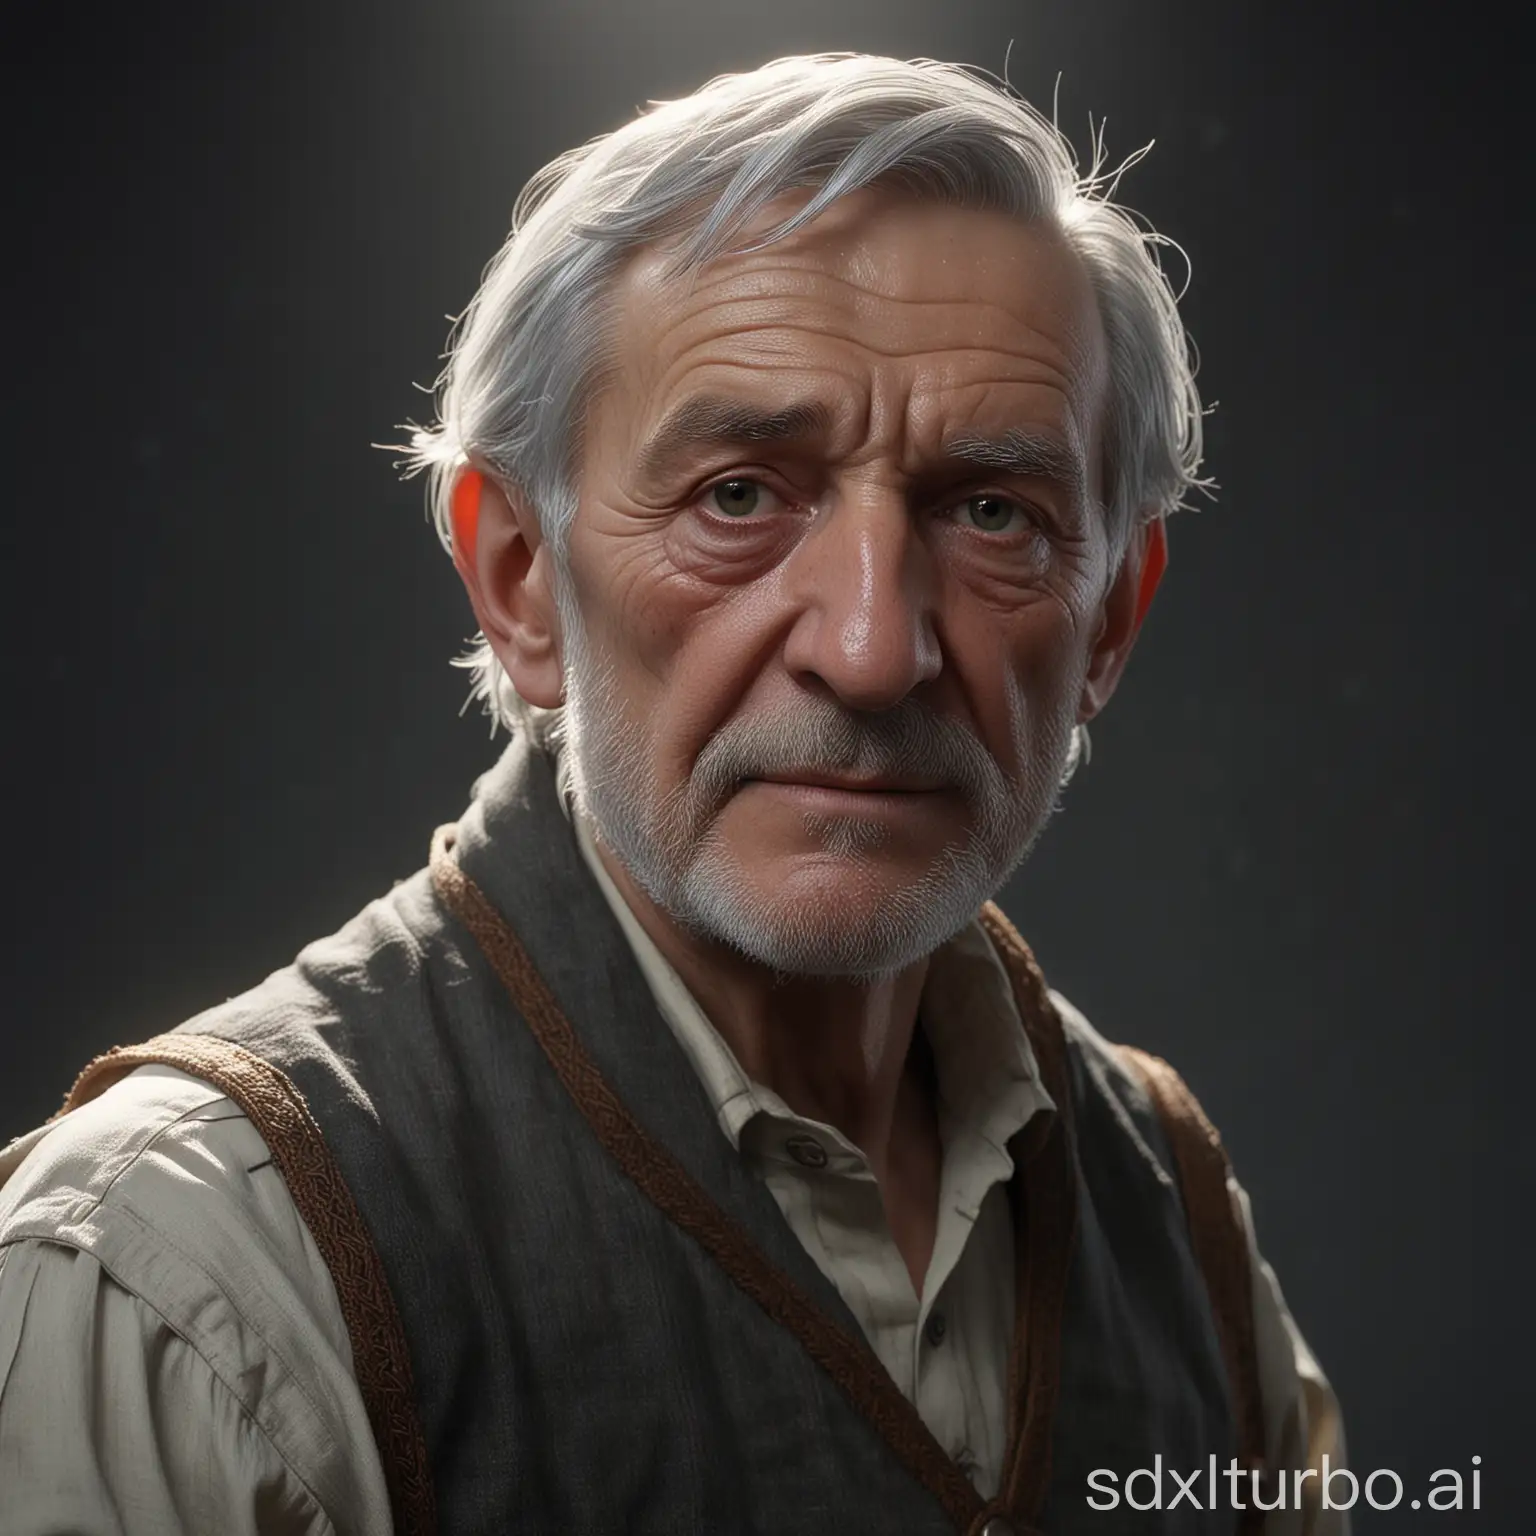 Abraham, an elderly man with gray hair, , dressed in farmer clothes from the time of Middle Ages, Cinematic lighting, Unreal Engine 5, Cinematic, Color Grading, Editorial Photography, Photography, Photoshoot, Shot on 70mm lens, Depth of Field, DOF, Tilt Blur, Shutter Speed 1/1000, F/22, White Balance, 32k, Super-Resolution, Megapixel, ProPhoto RGB, VR, tall, epic, artgerm, alex ross, Halfrear Lighting, Backlight, Natural Lighting, Incandescent, Optical Fiber, Moody Lighting, Cinematic Lighting, Studio Lighting, Soft Lighting, Volumetric, Contre-Jour, dark lighting, Accent Lighting, Global Illumination, Screen Space Global Illumination, Ray Tracing Global Illumination, Red Rim light, cool color grading 45,
